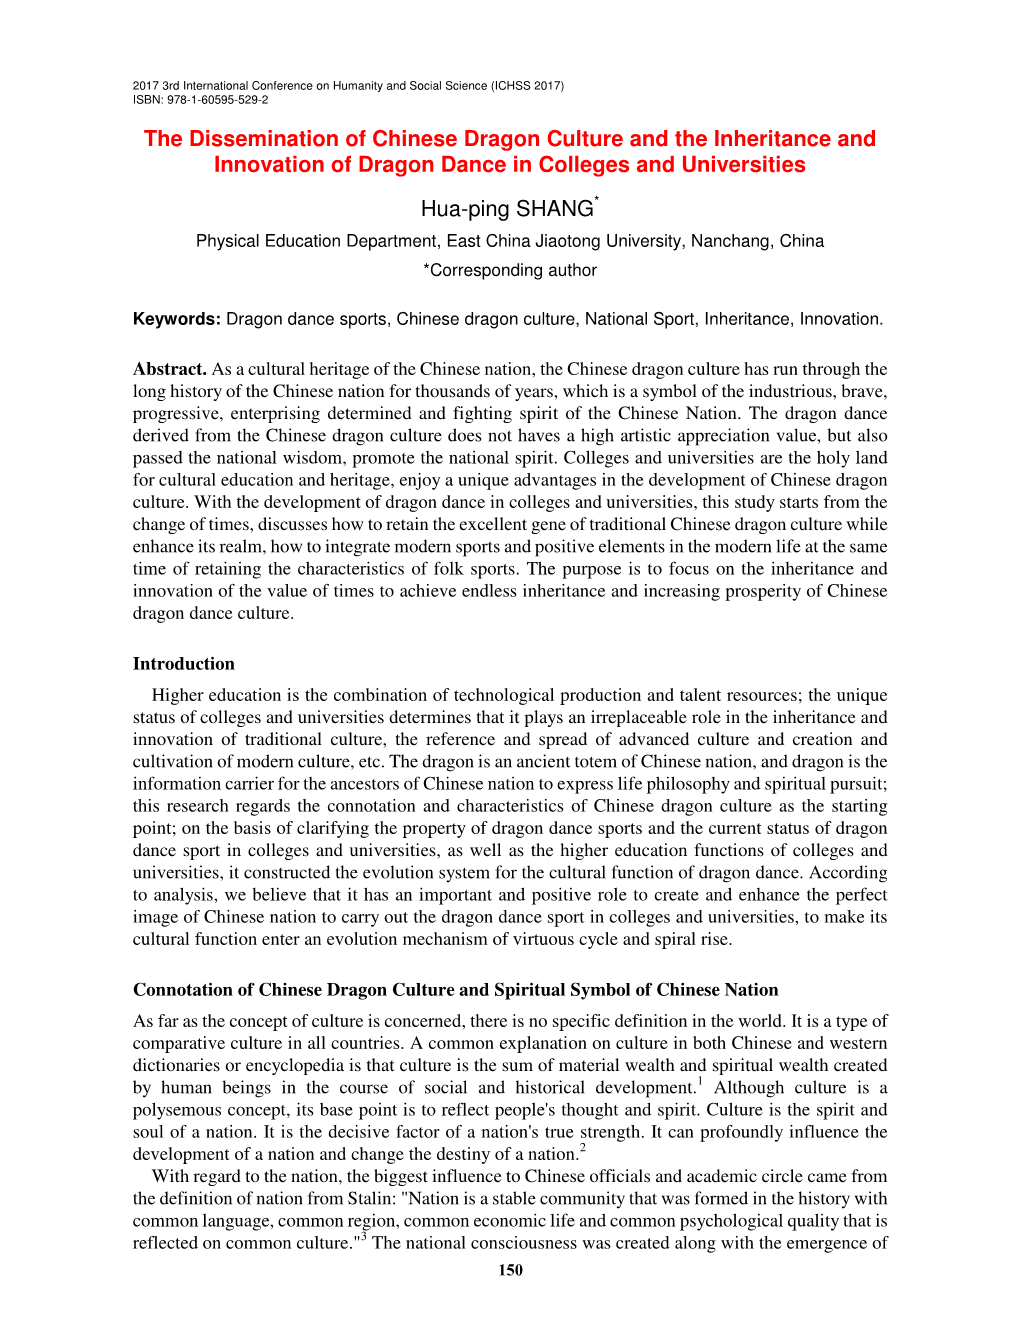 The Dissemination of Chinese Dragon Culture and the Inheritance and Innovation of Dragon Dance in Colleges and Universities